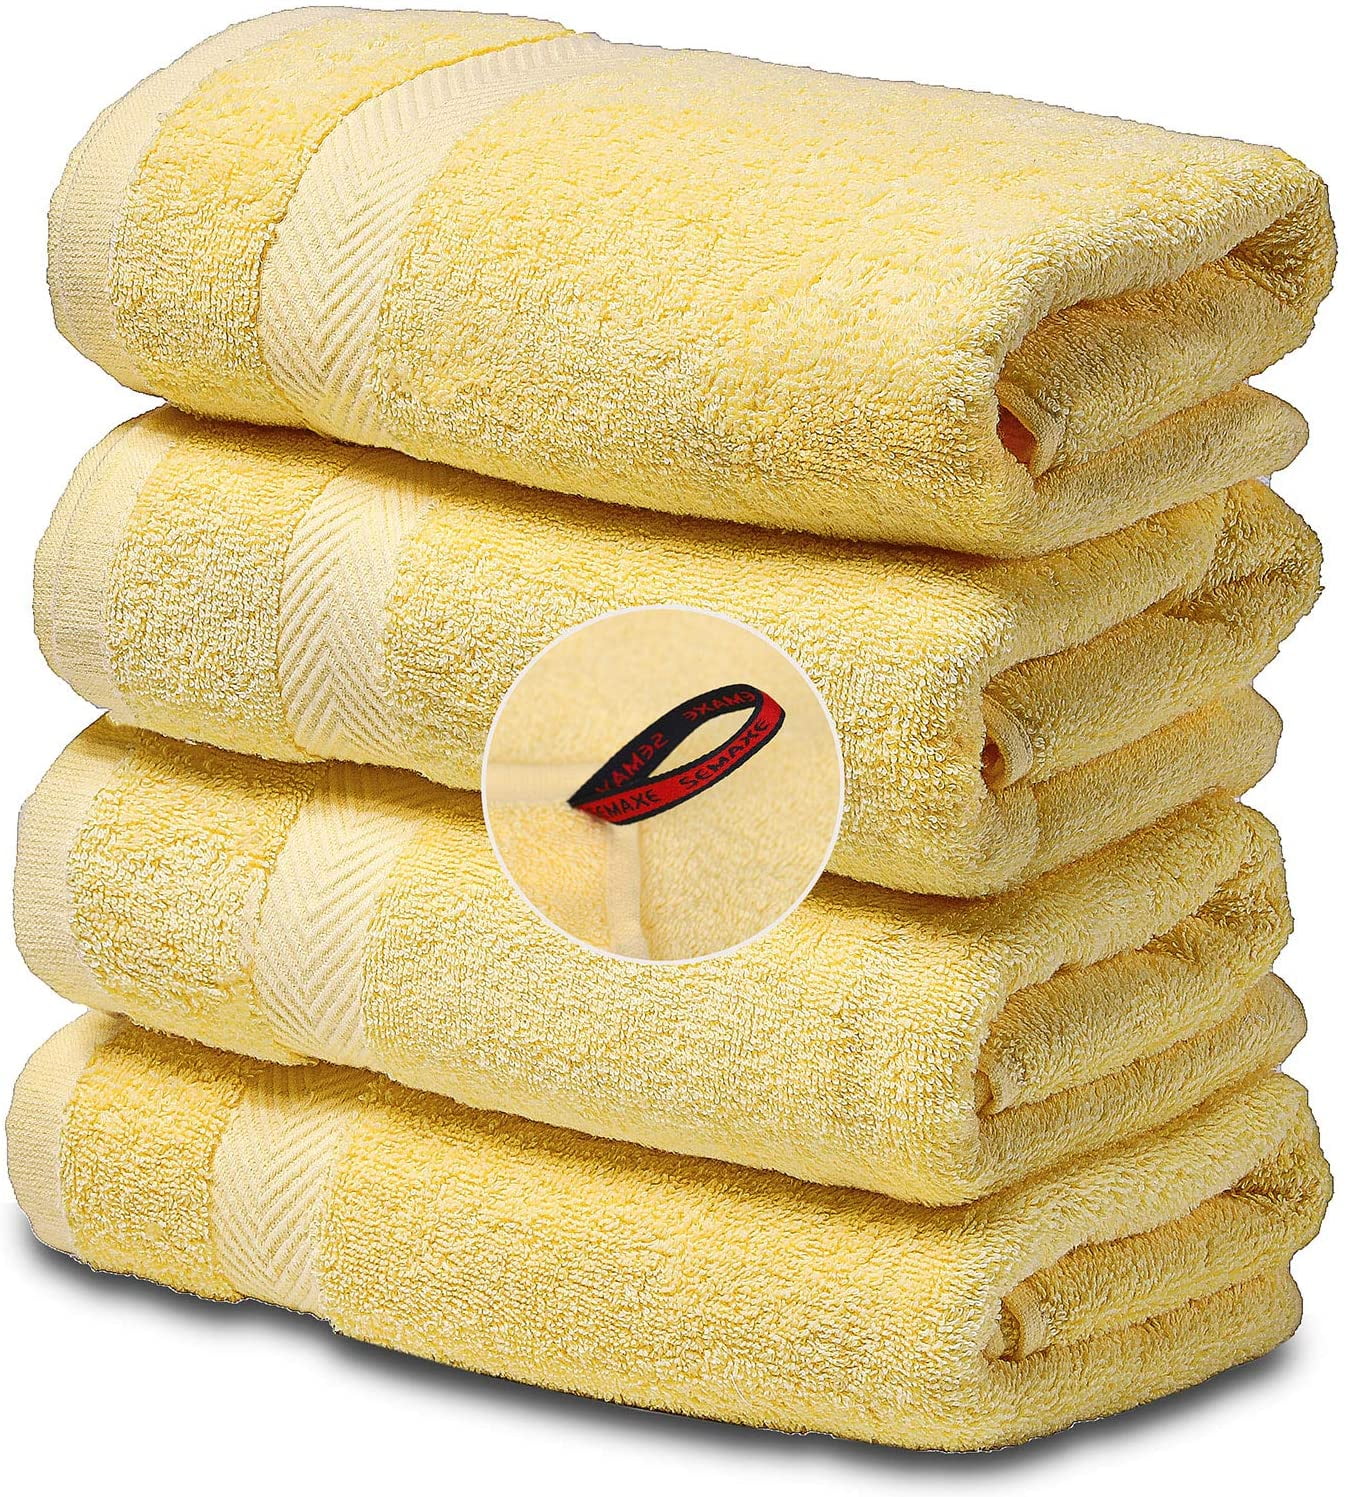 SEMAXE Cotton Towel Absorbent & Soft Bathroom White Hand Towel,Experience Outfit,16”X 27”